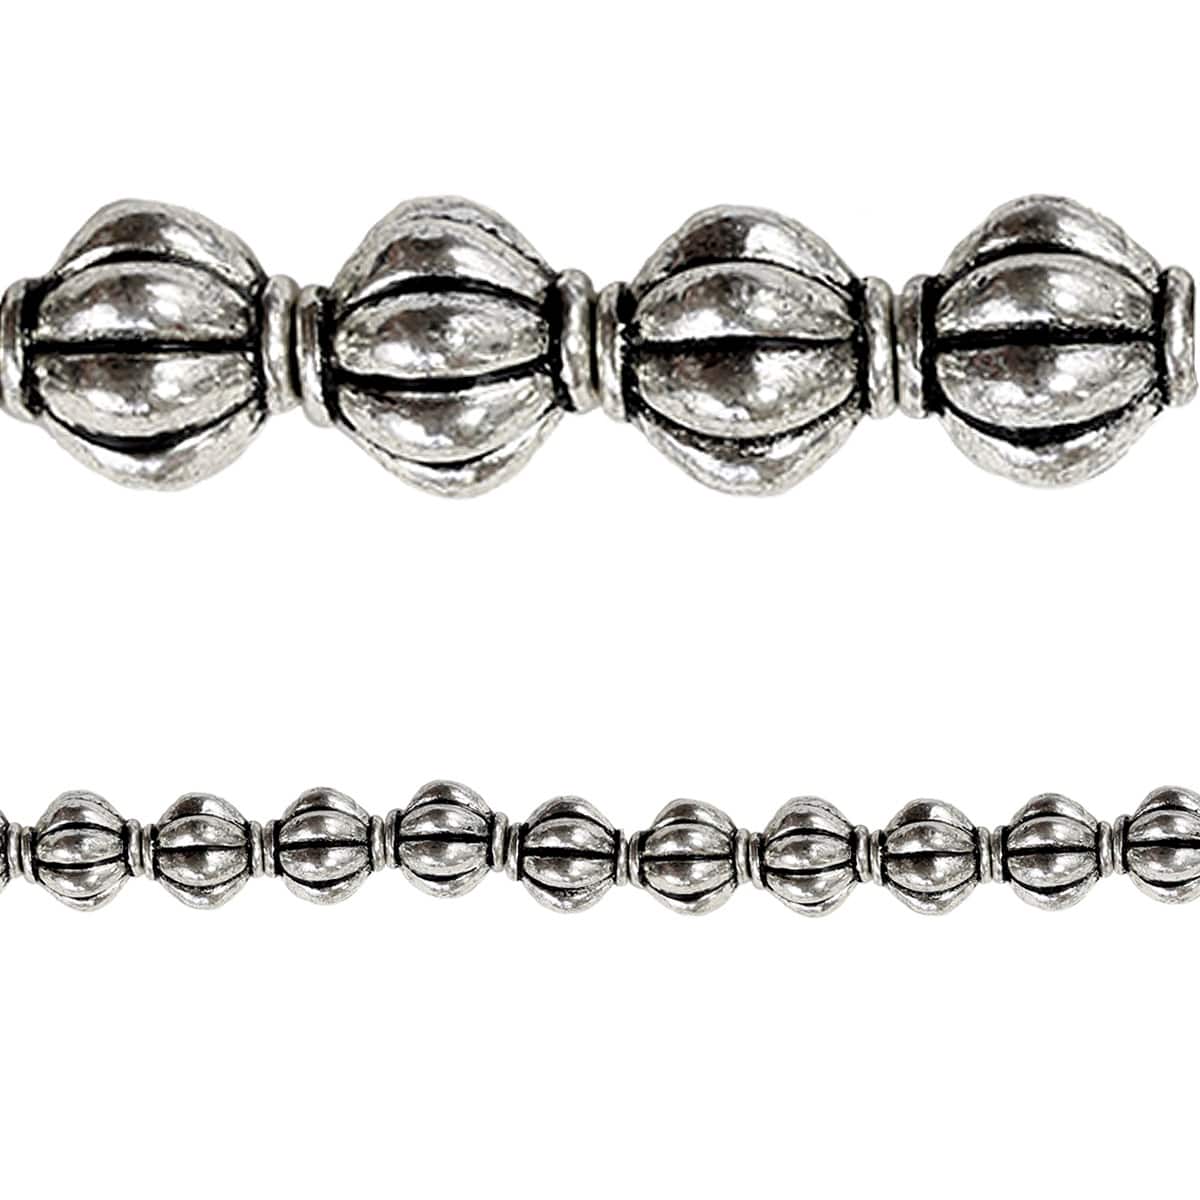 Bead Gallery® Antique Sterling Silver Plated Beads, 8mm | Michaels